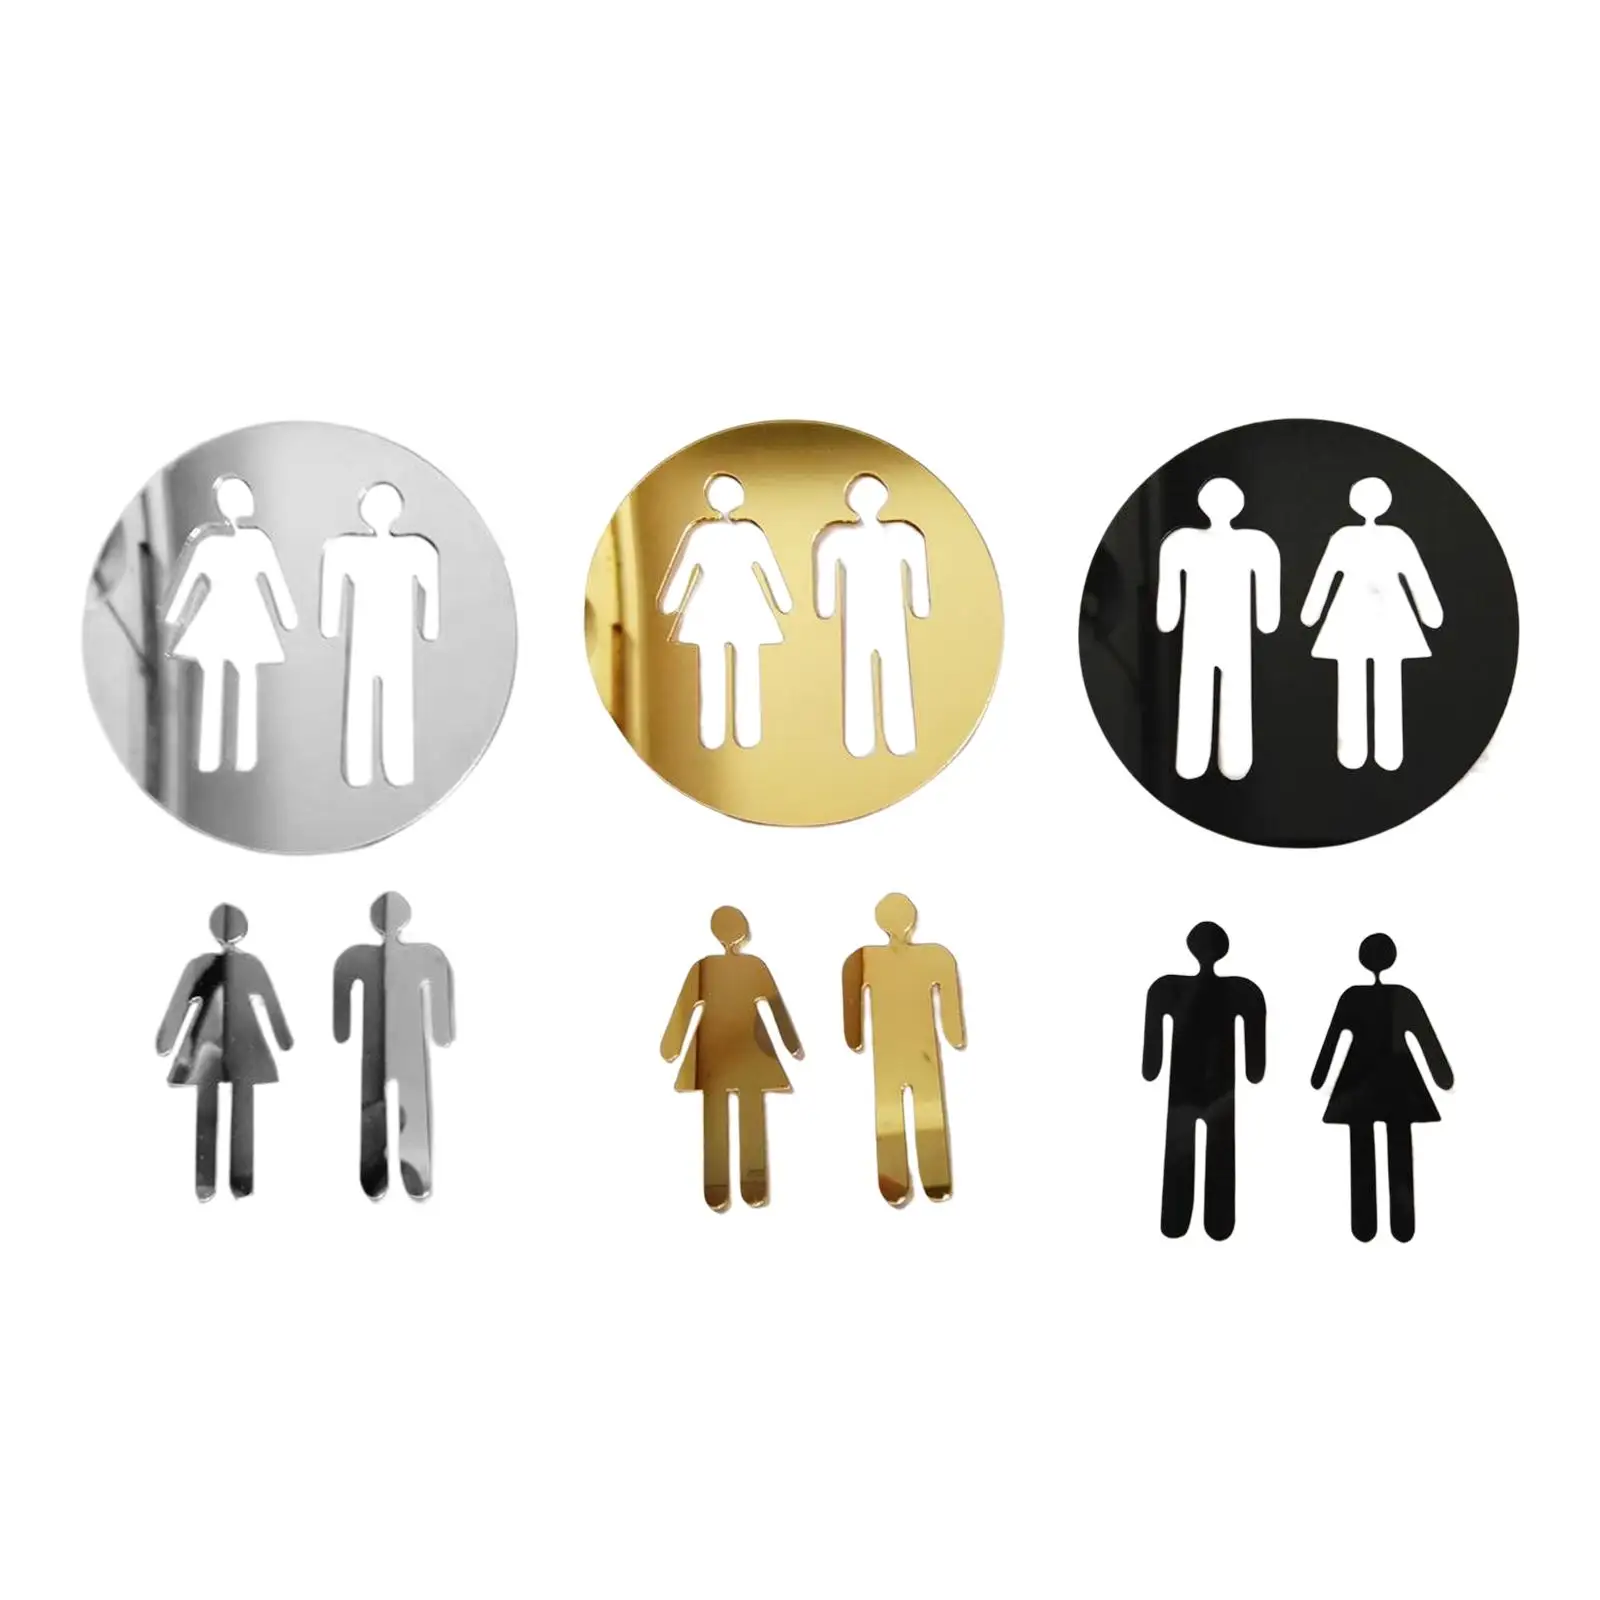 Men and Women Restroom Signs Symbols Pictogram Acrylic Toilet Door Plates Sign Placard for Commercial Office Business